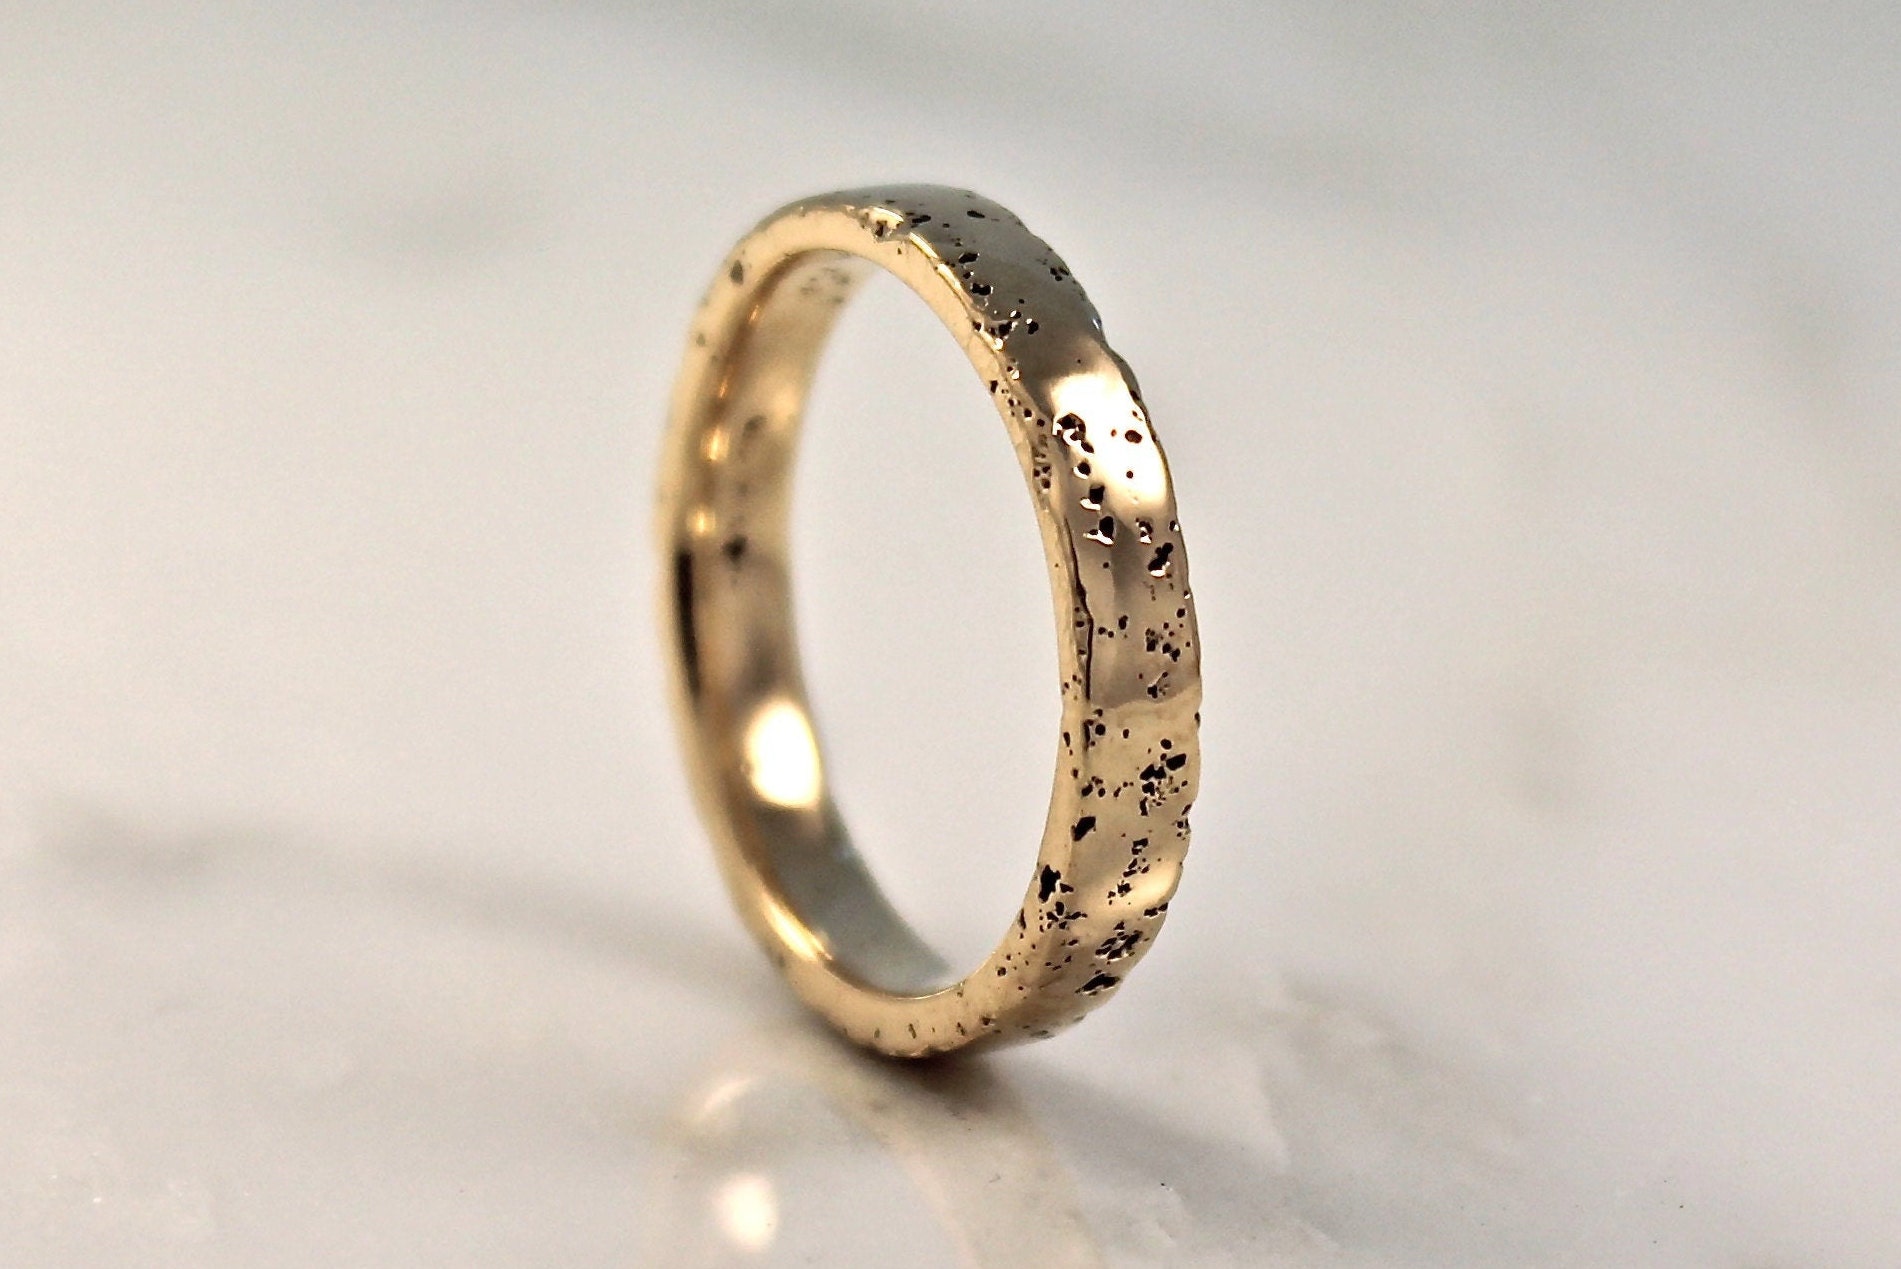 Textured Thin Gold Wedding Ring, Elegant Band, Unique Hand Cast Sand Ring